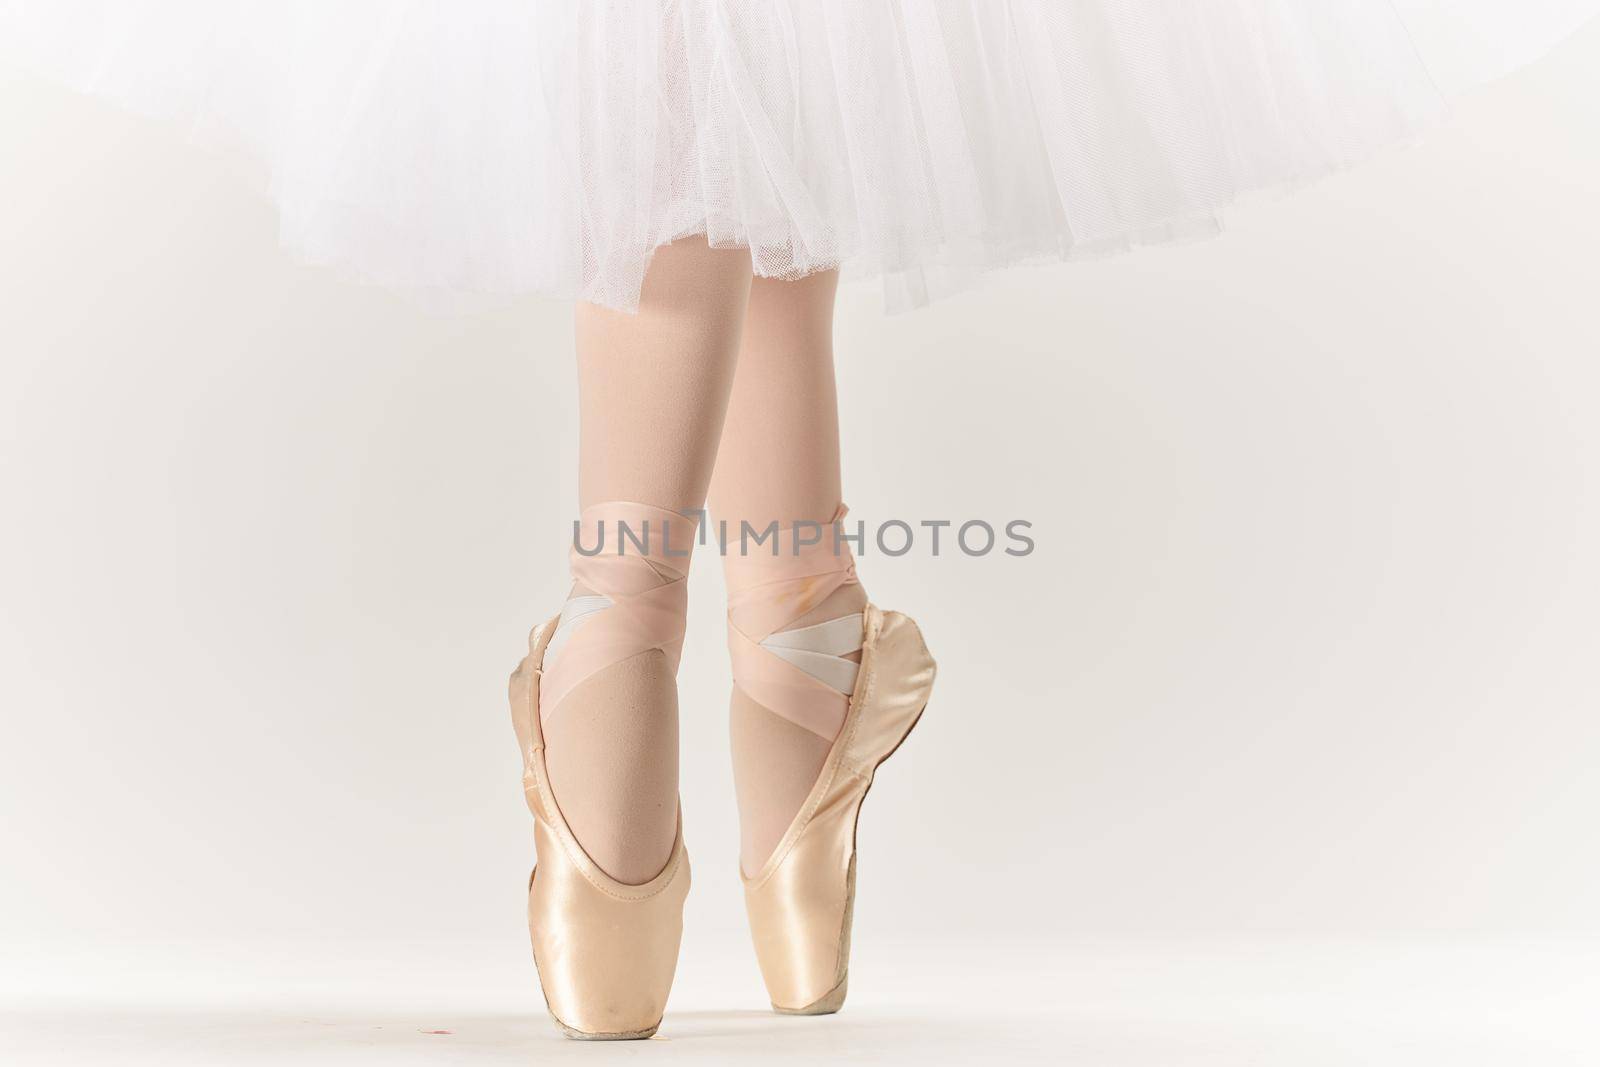 ballet shoes dance performed classical style light background by Vichizh